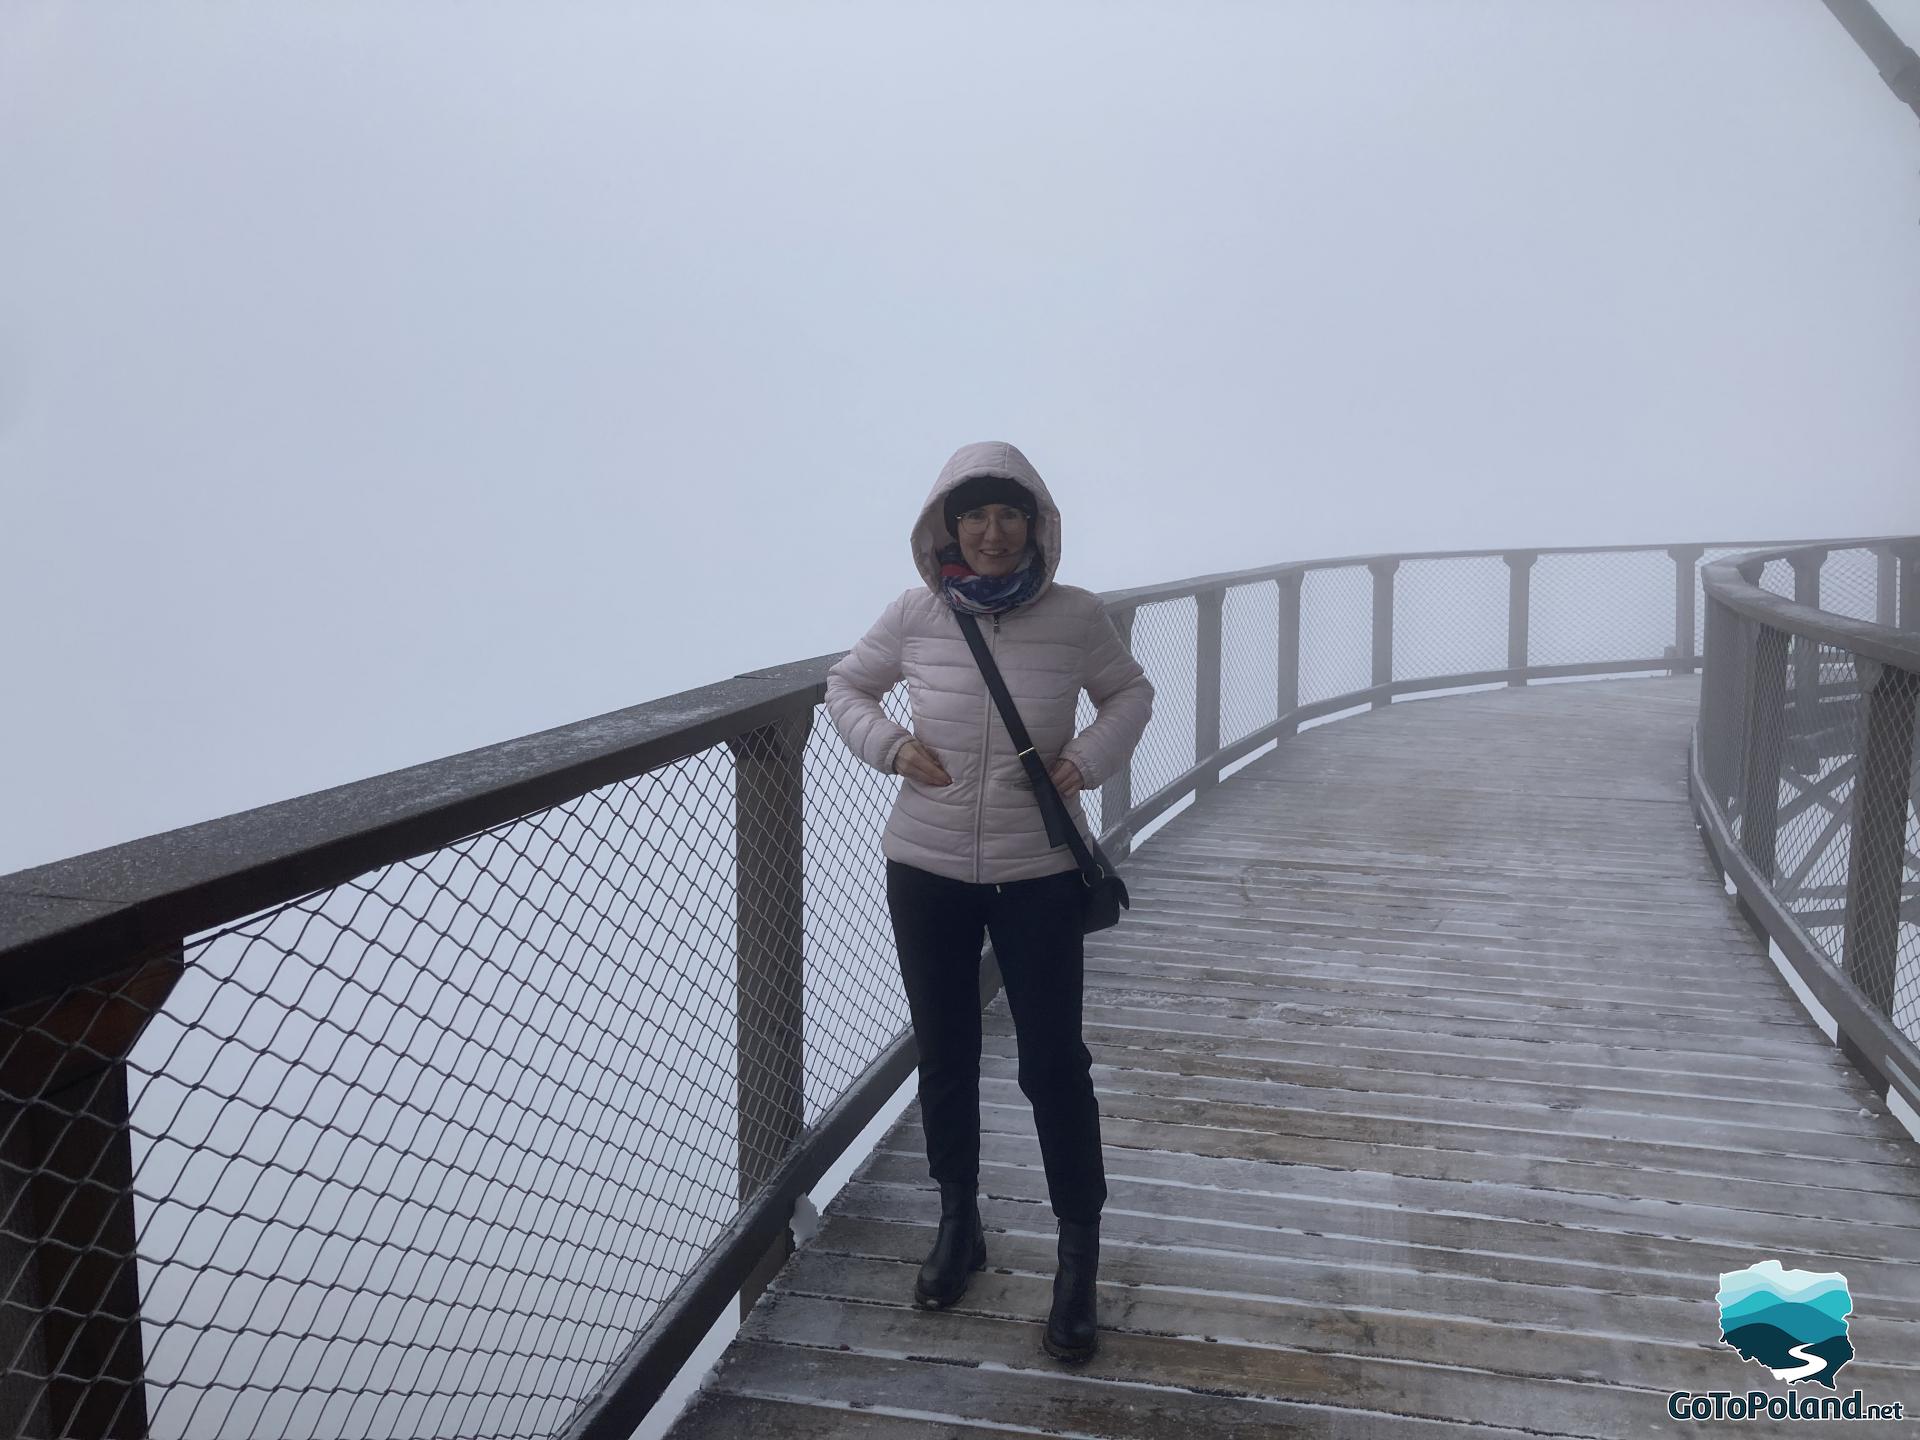 a woman is on a wooden path on an observation tower